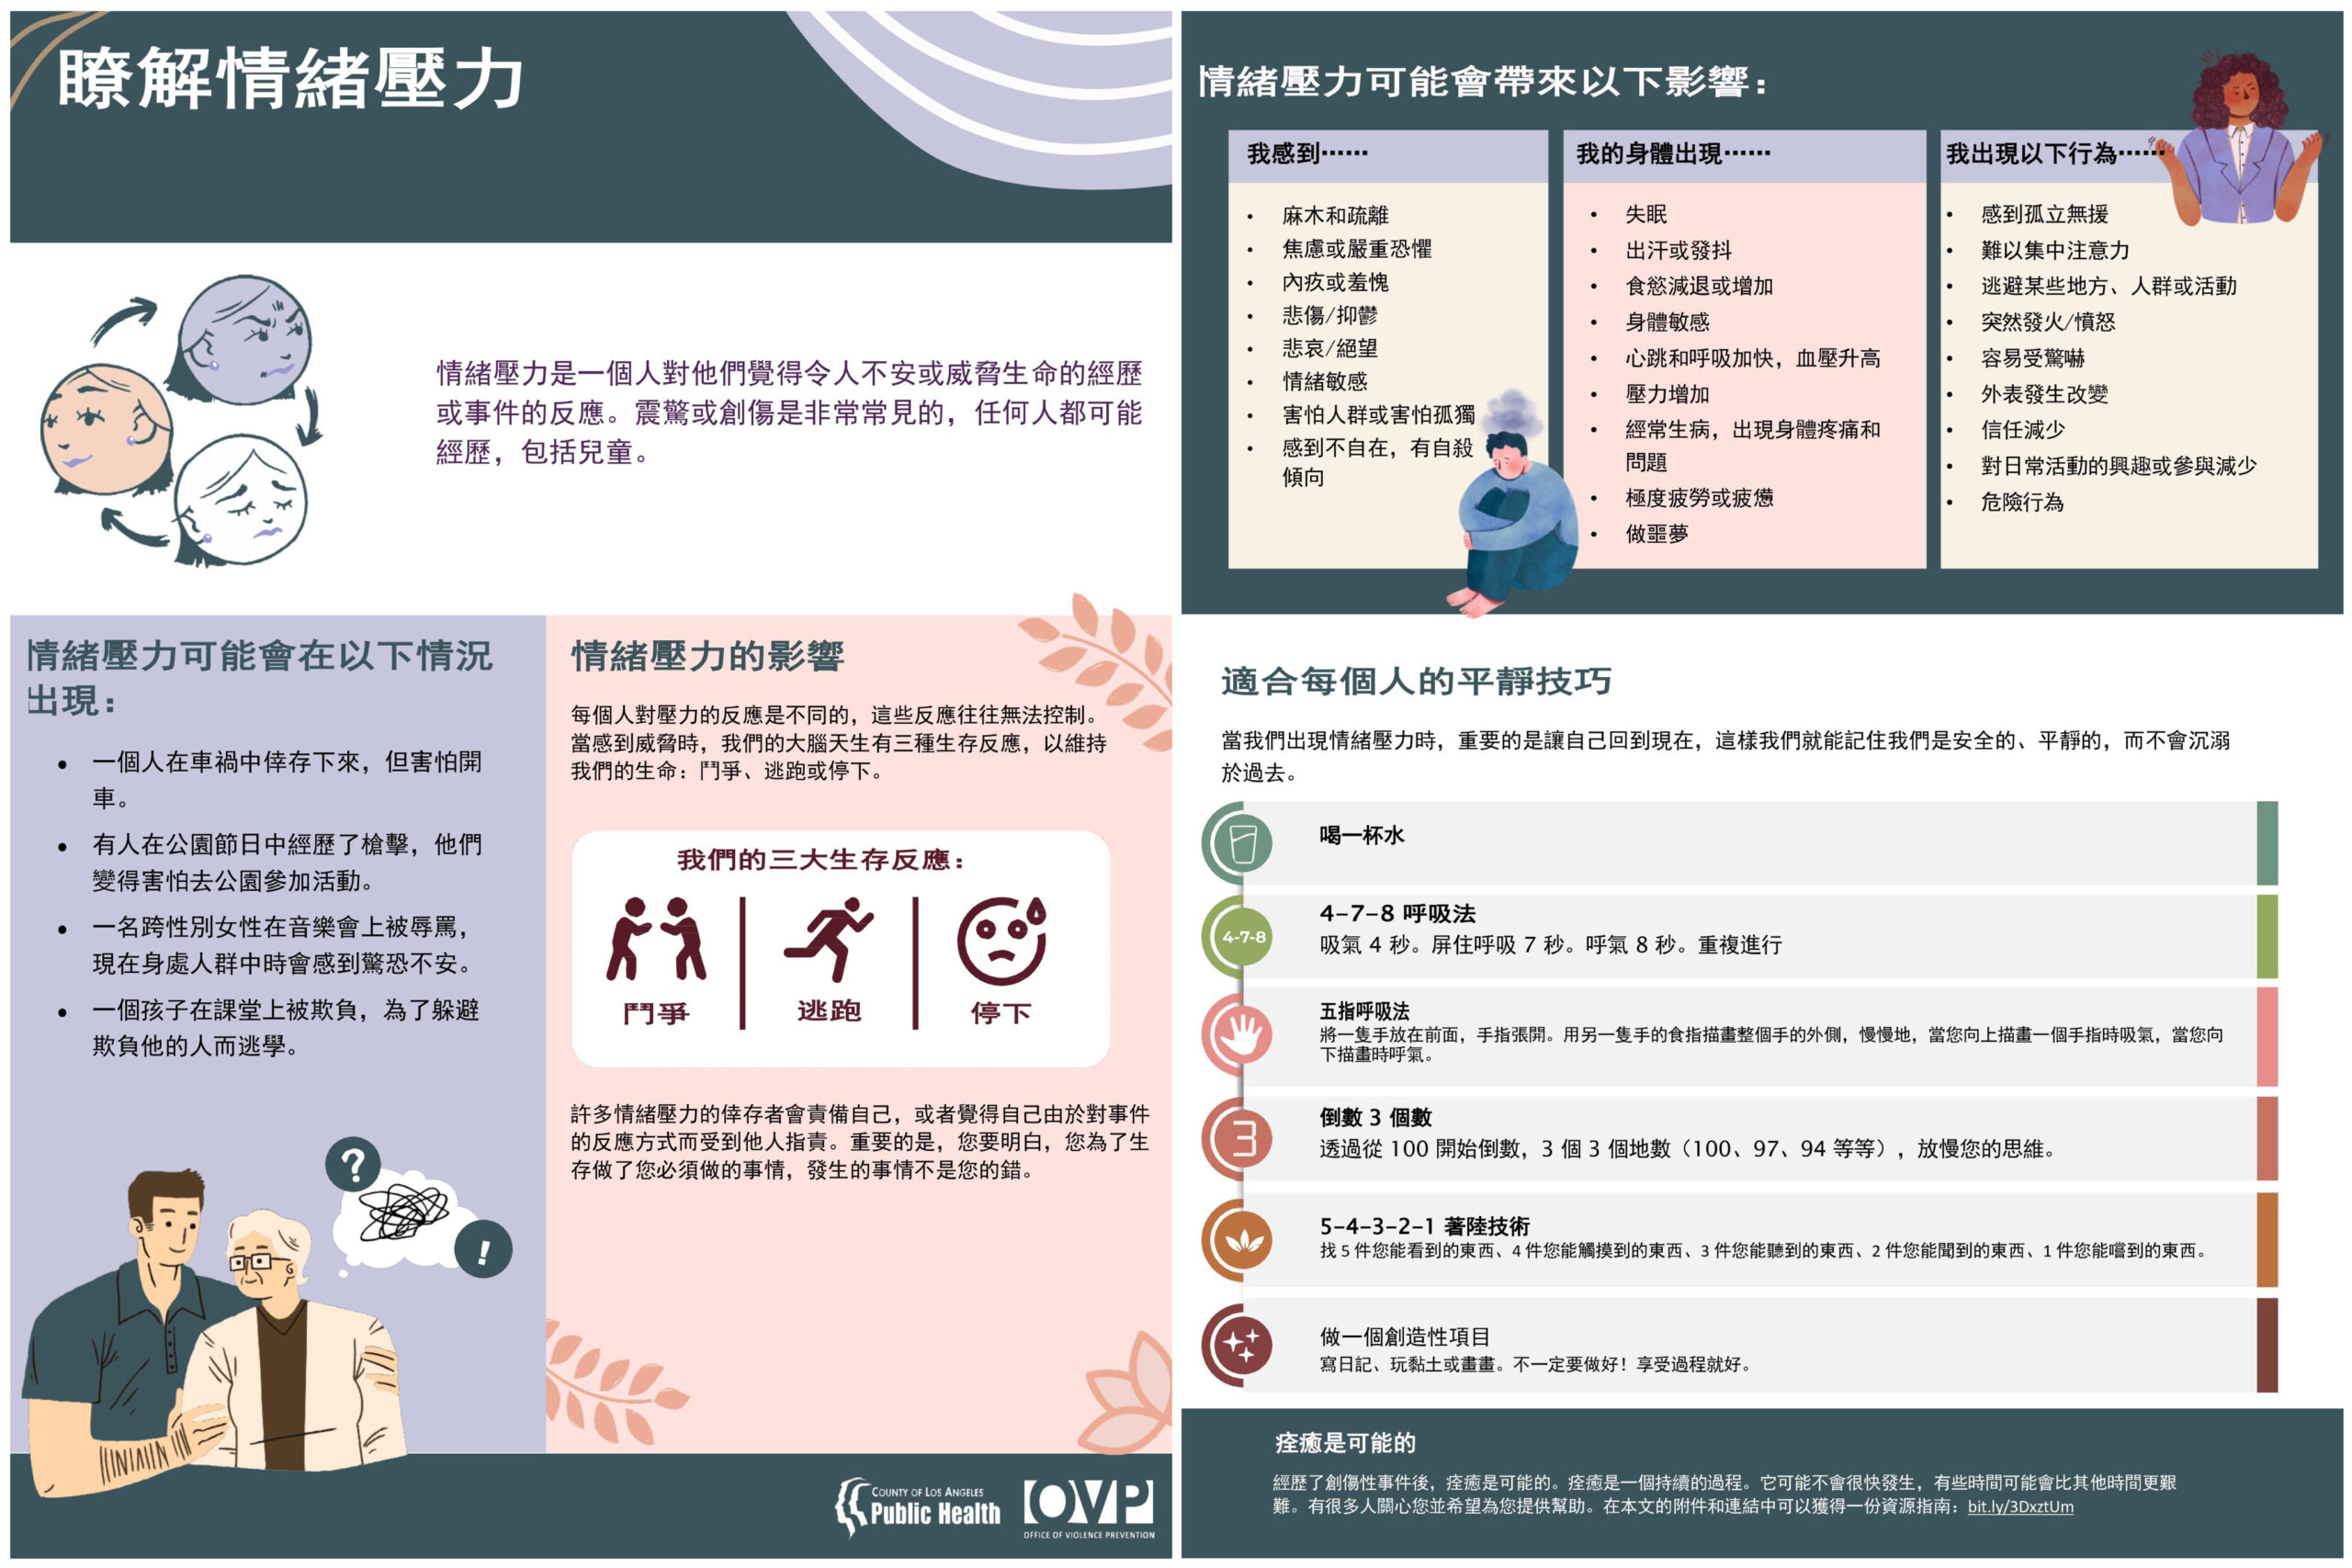 Graphic showing emotional support resources translated into Chinese